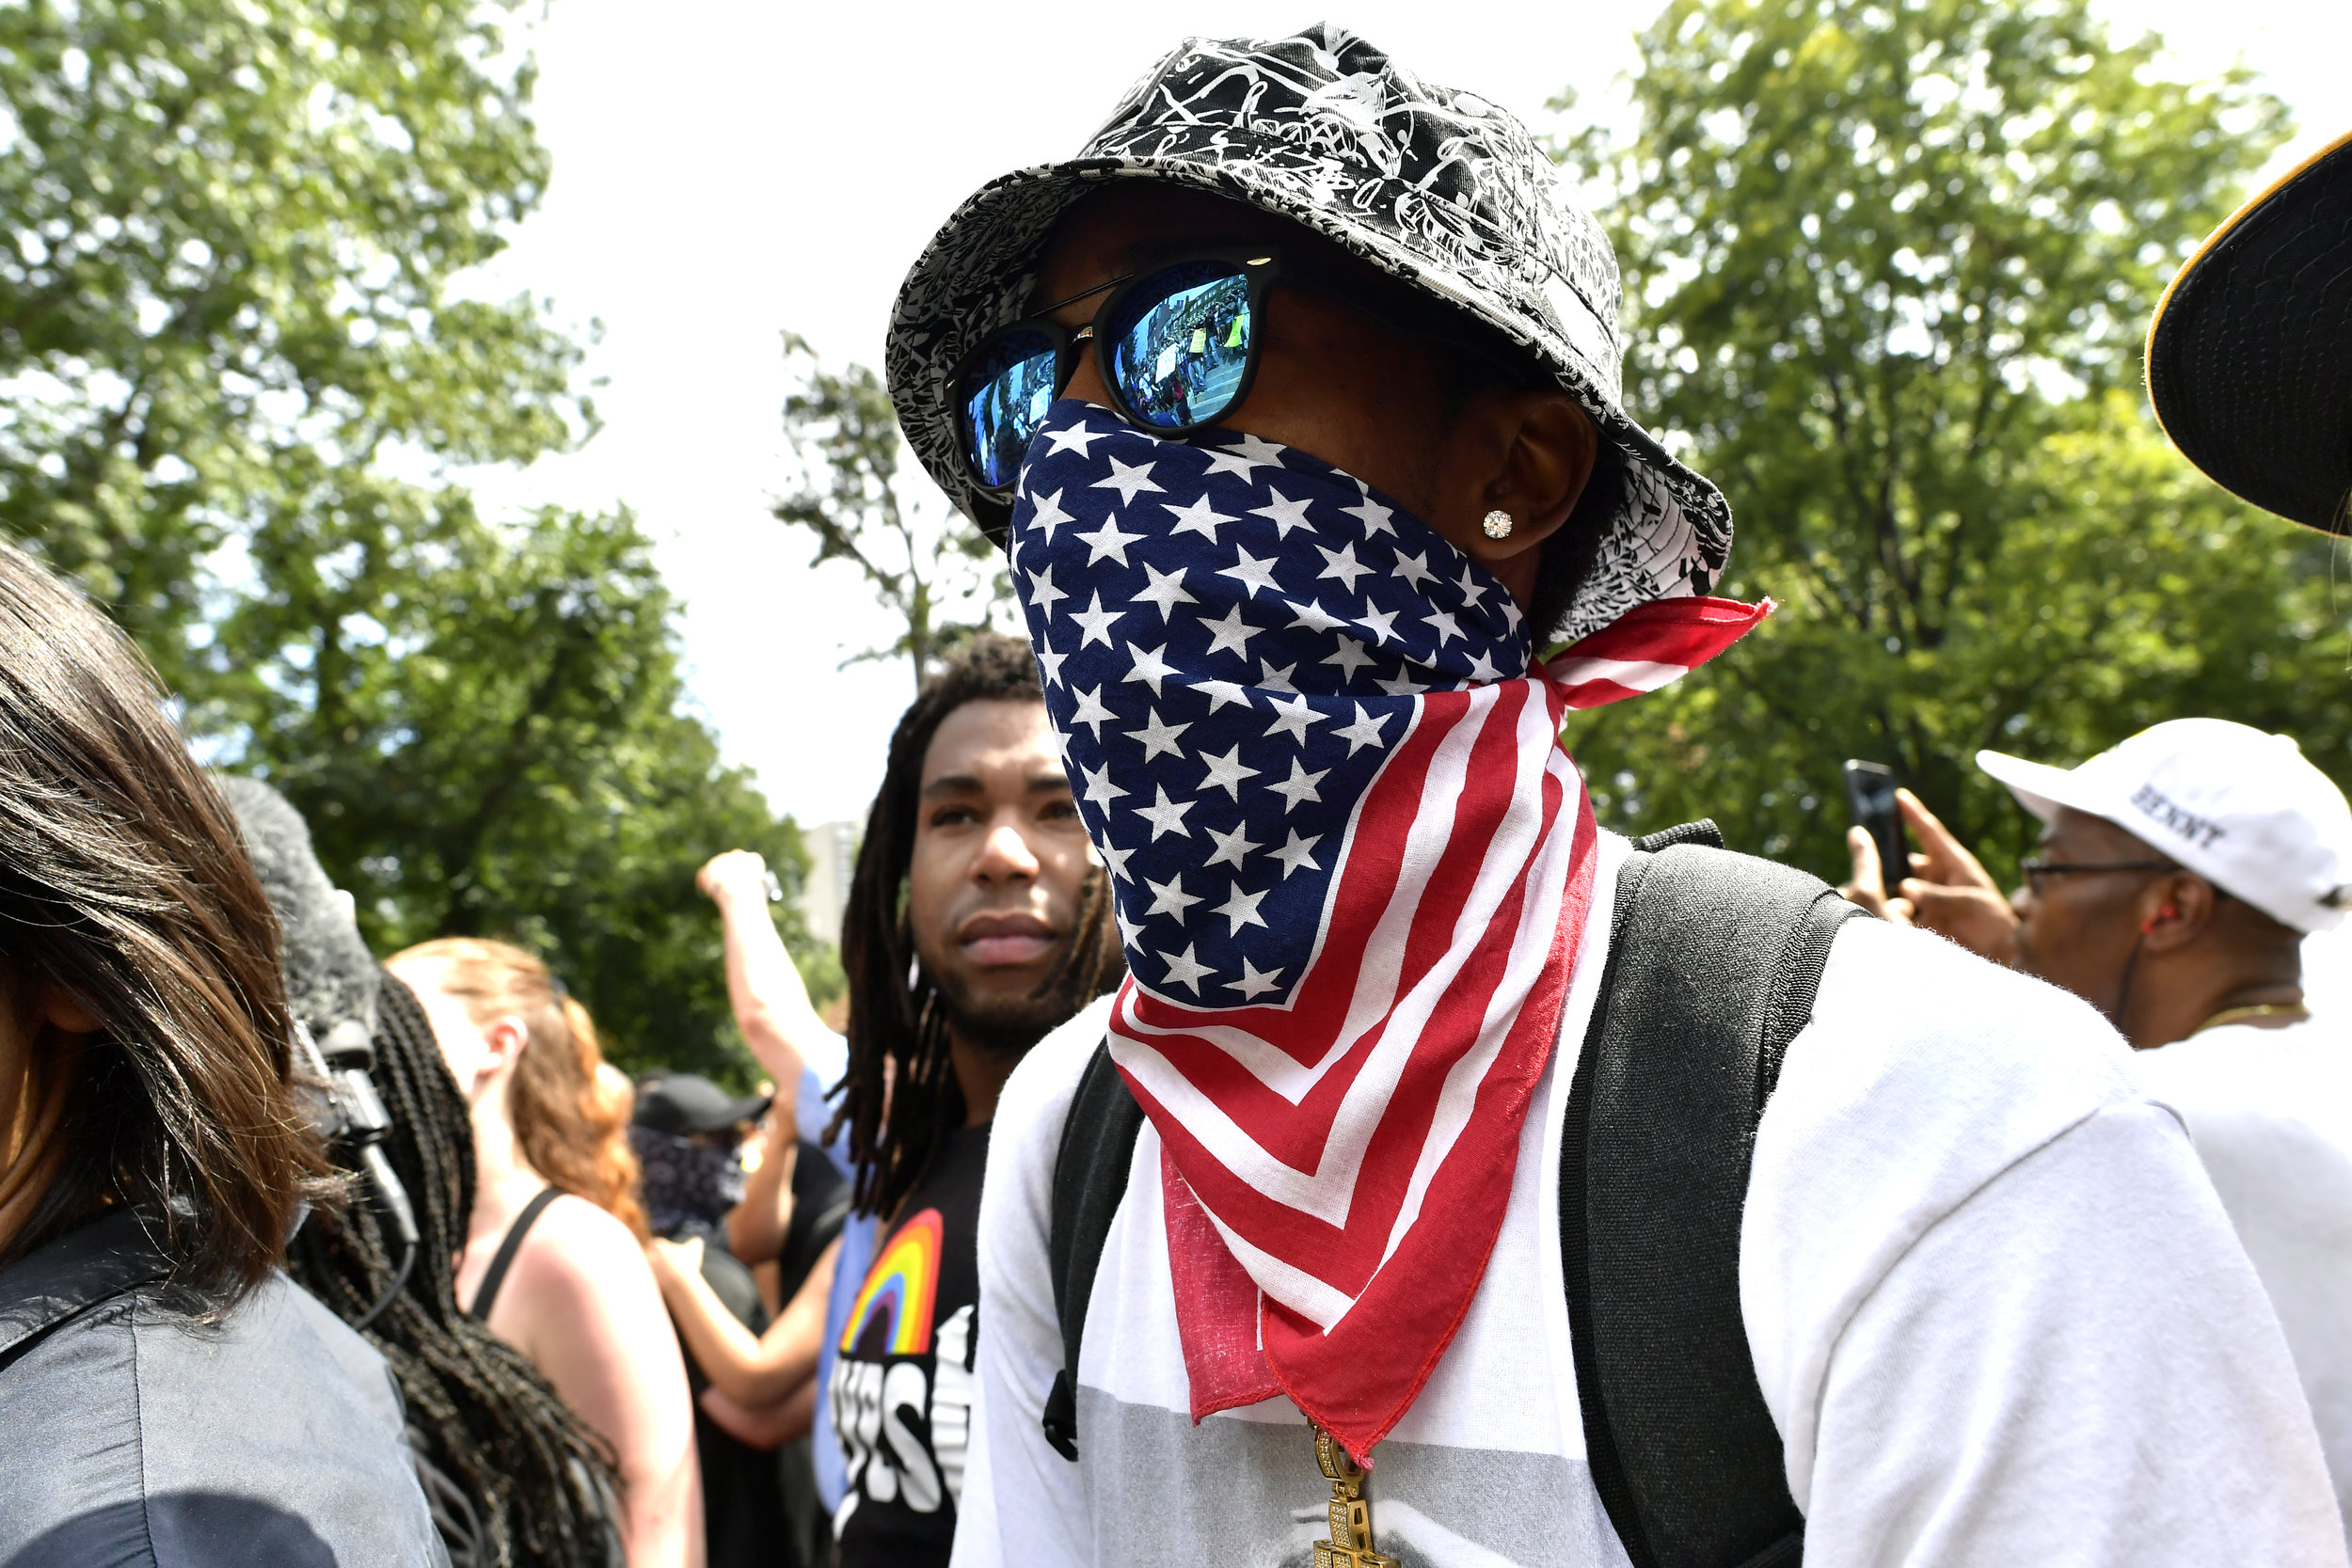  BOSTON, MA Saturday, August 19, 2017 -- Black Lives Matter protesters burn a Confederate flag as tens of thousands of demonstrators turned out to protest the Boston Free Speech Rally on Boston Common. 